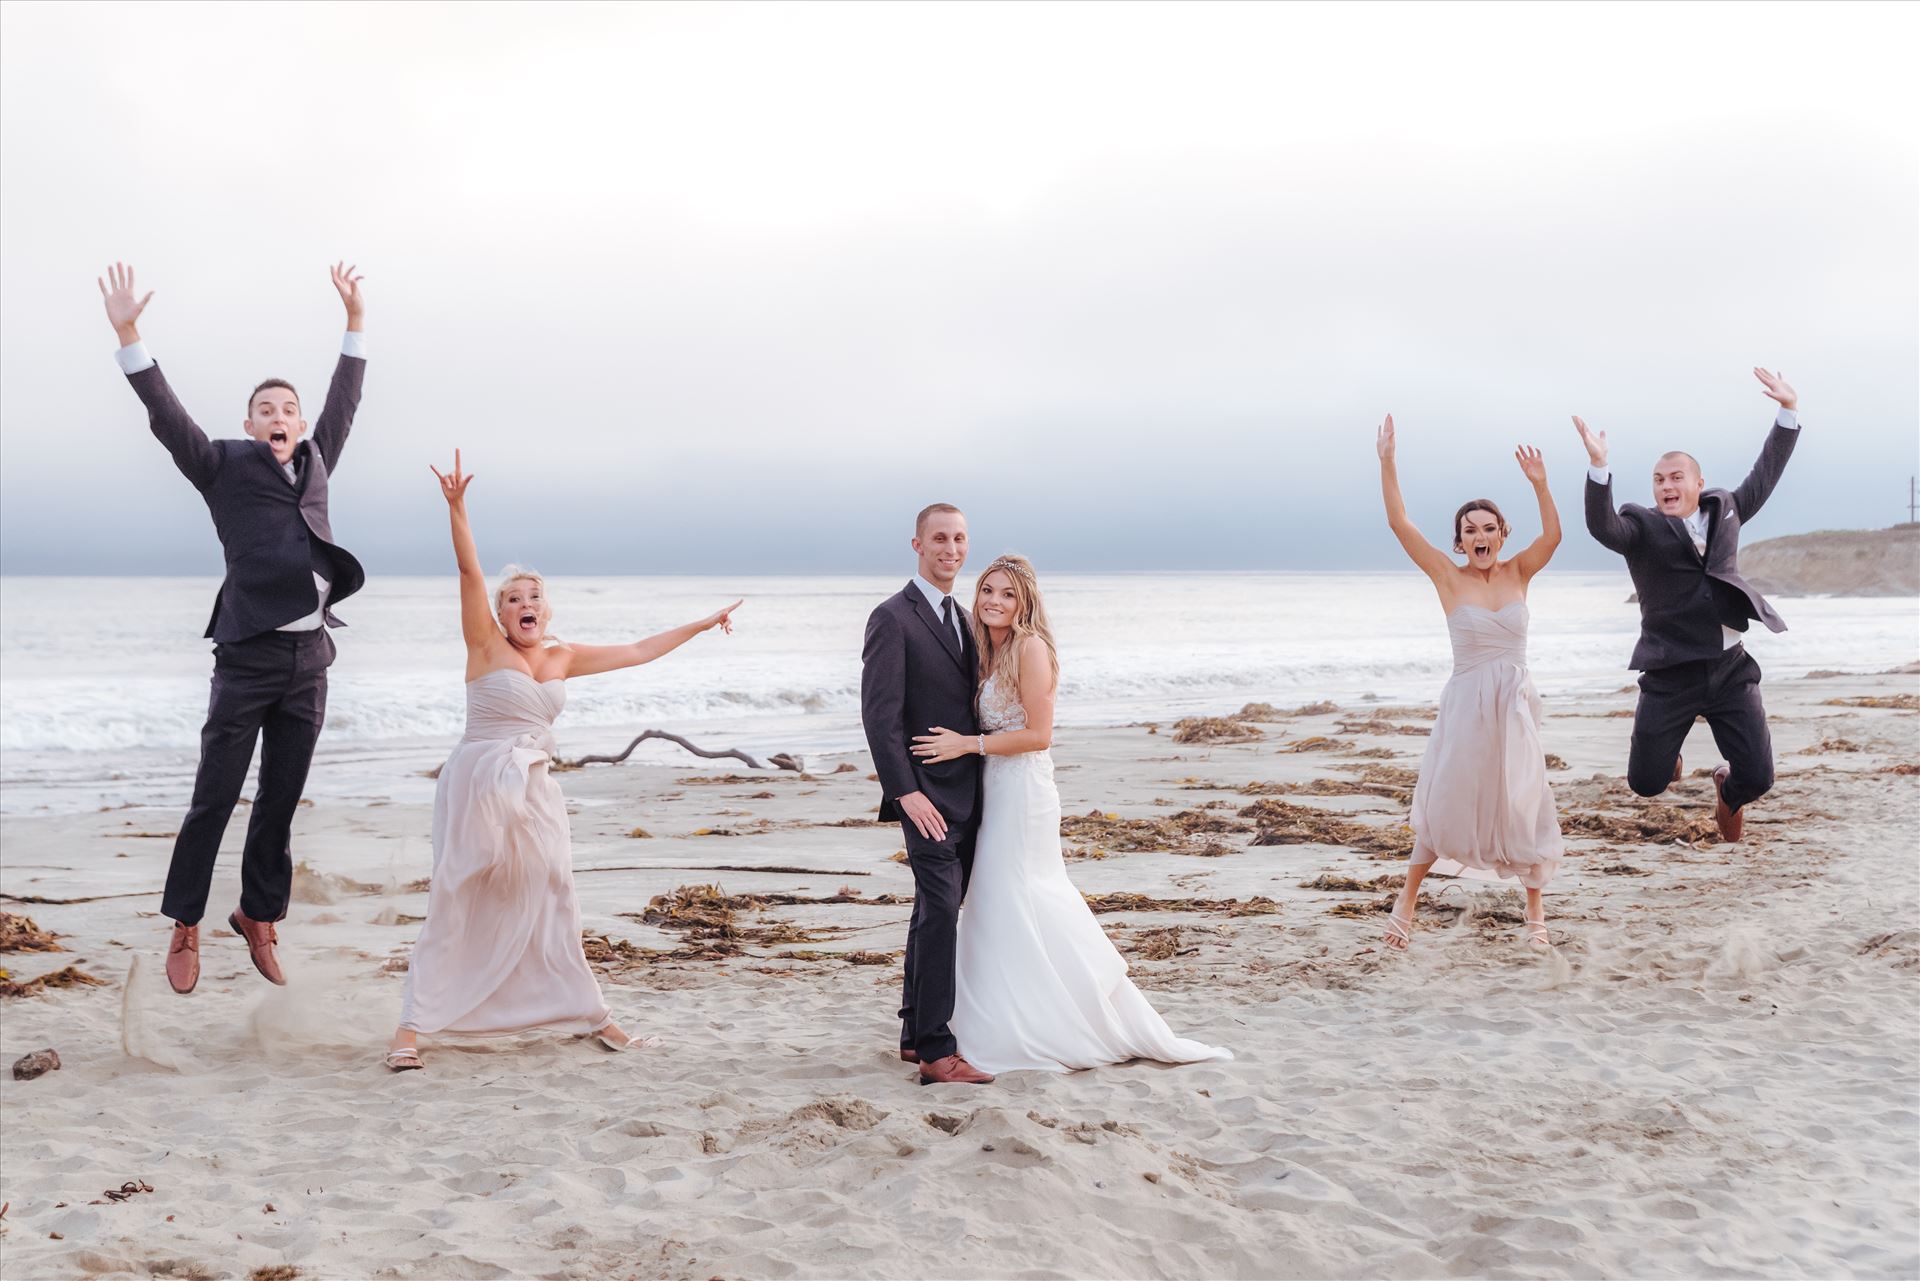 Courtney and Doug 69 - Mirror's Edge Photography, San Luis Obispo Wedding Photographer captures Cayucos Wedding on the beach and bluffs in Cayucos Central California Coast. Wedding Party Bridal Party fun at the Beach by Sarah Williams